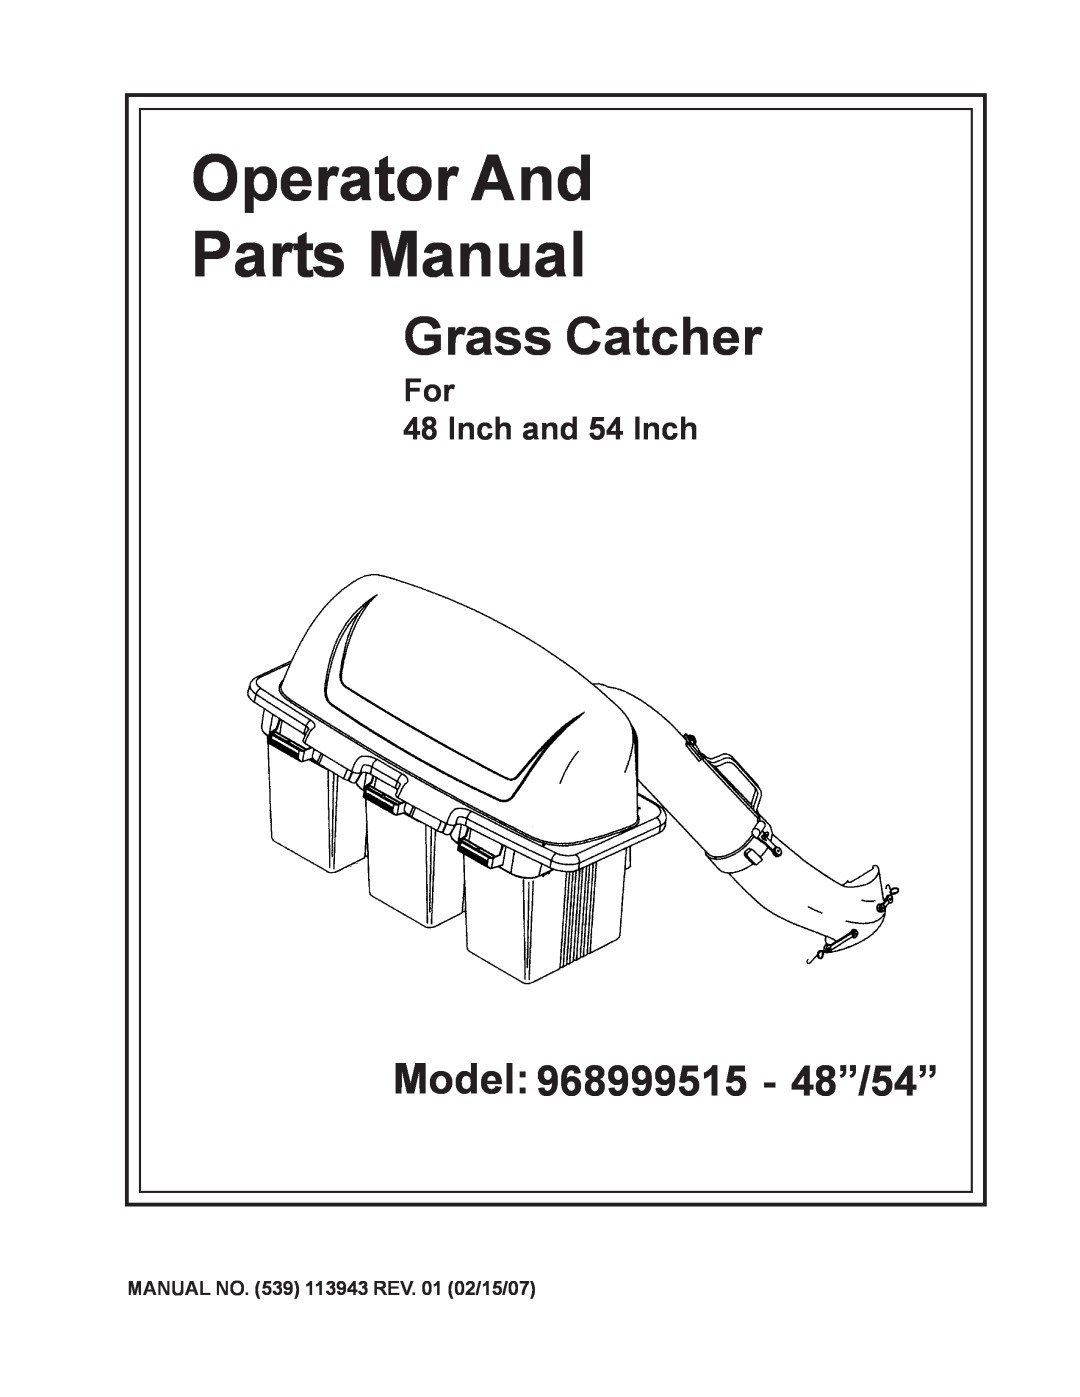 Husqvarna 968999515 manual Grass Catcher, For 48 Inch and 54 Inch, MANUAL NO. 539 113943 REV. 01 02/15/07 